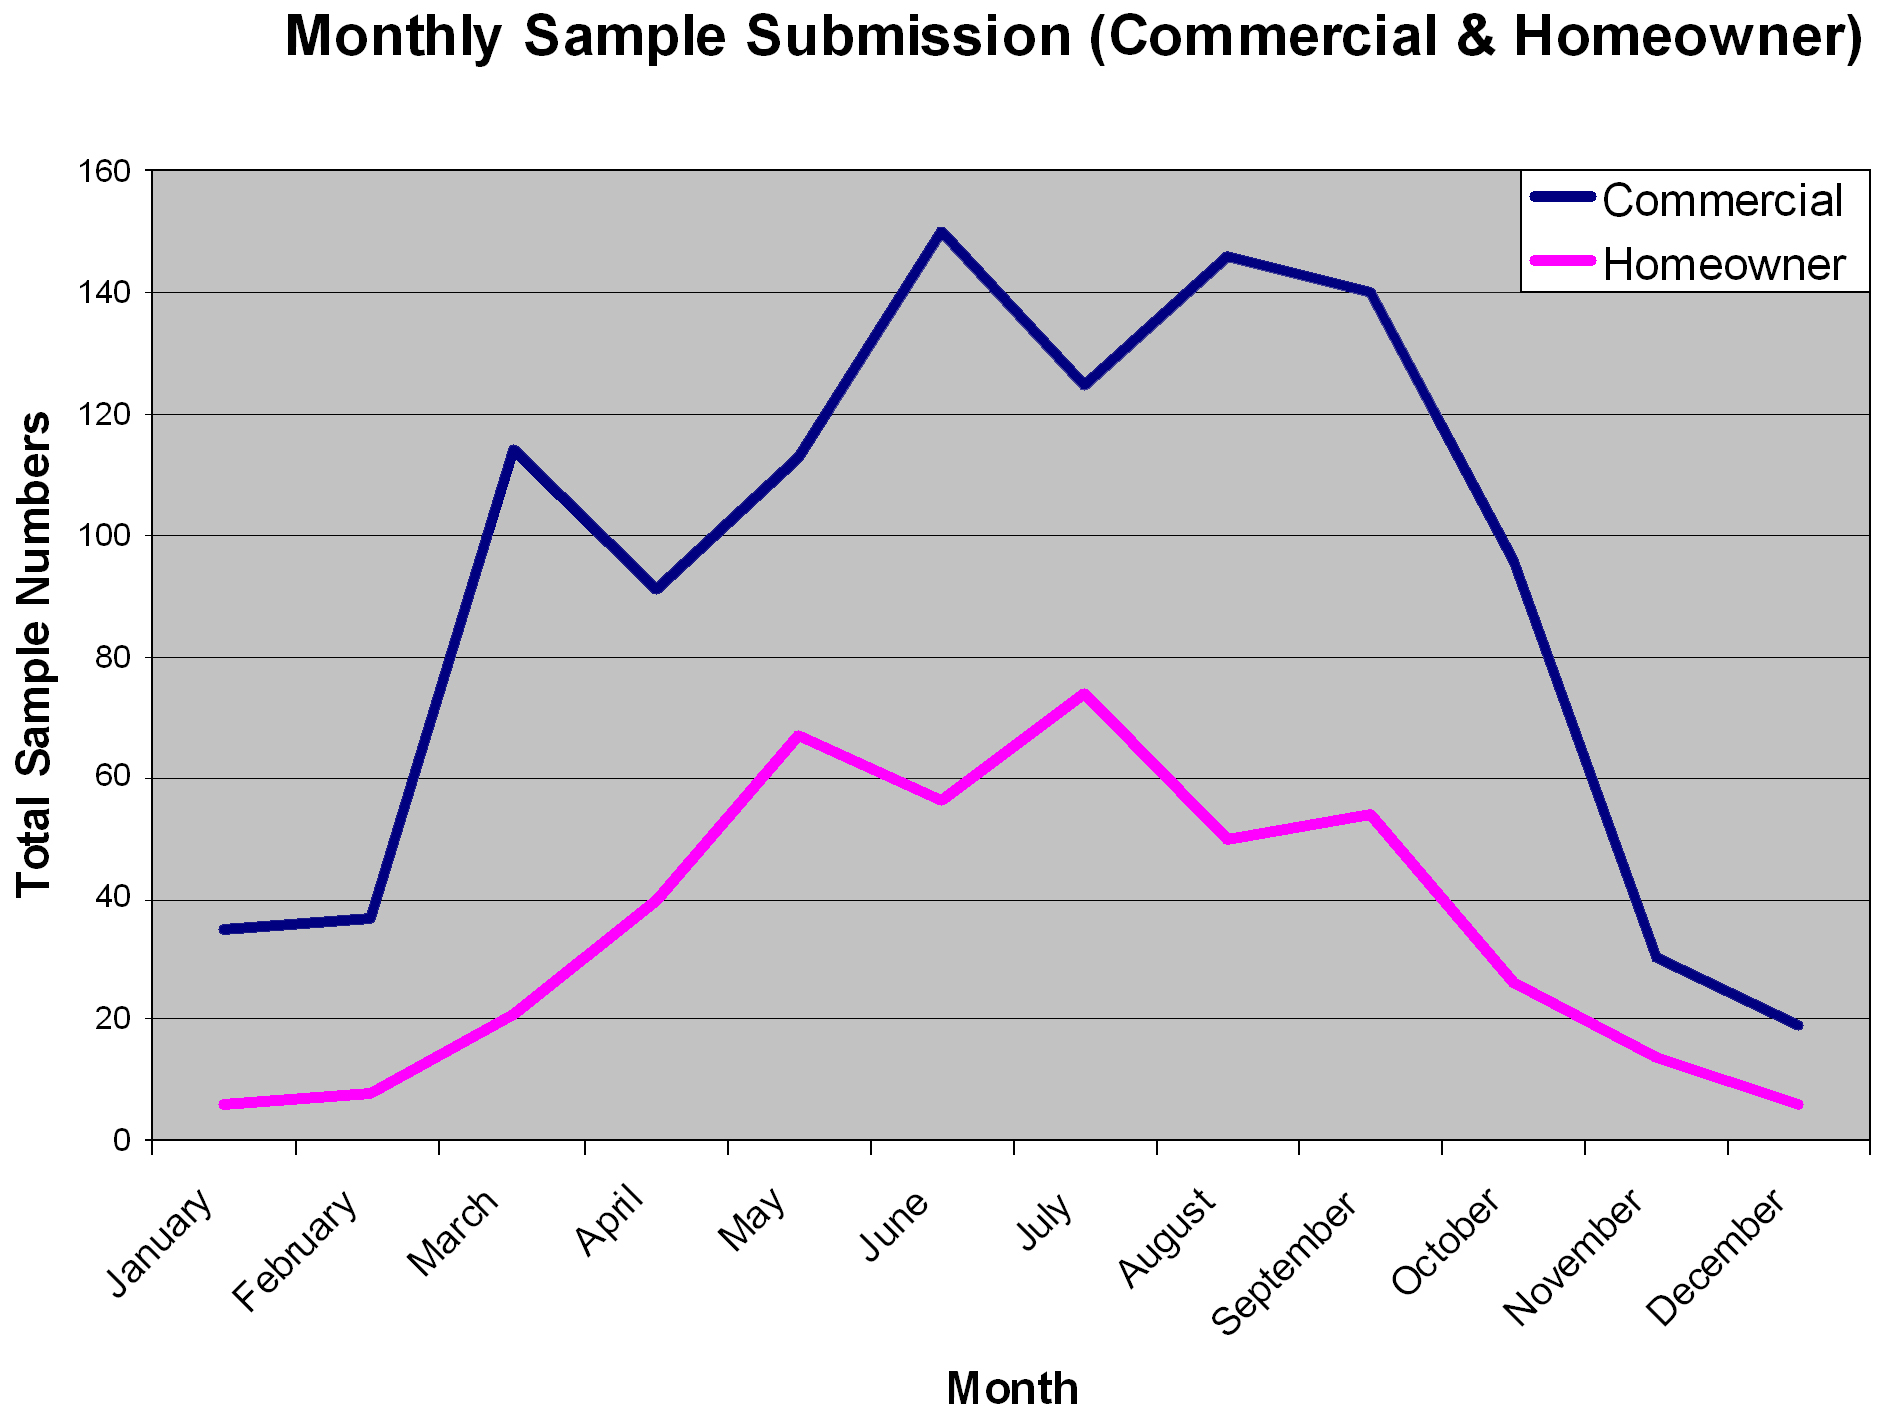 Monthly Sample Submission (C & H)